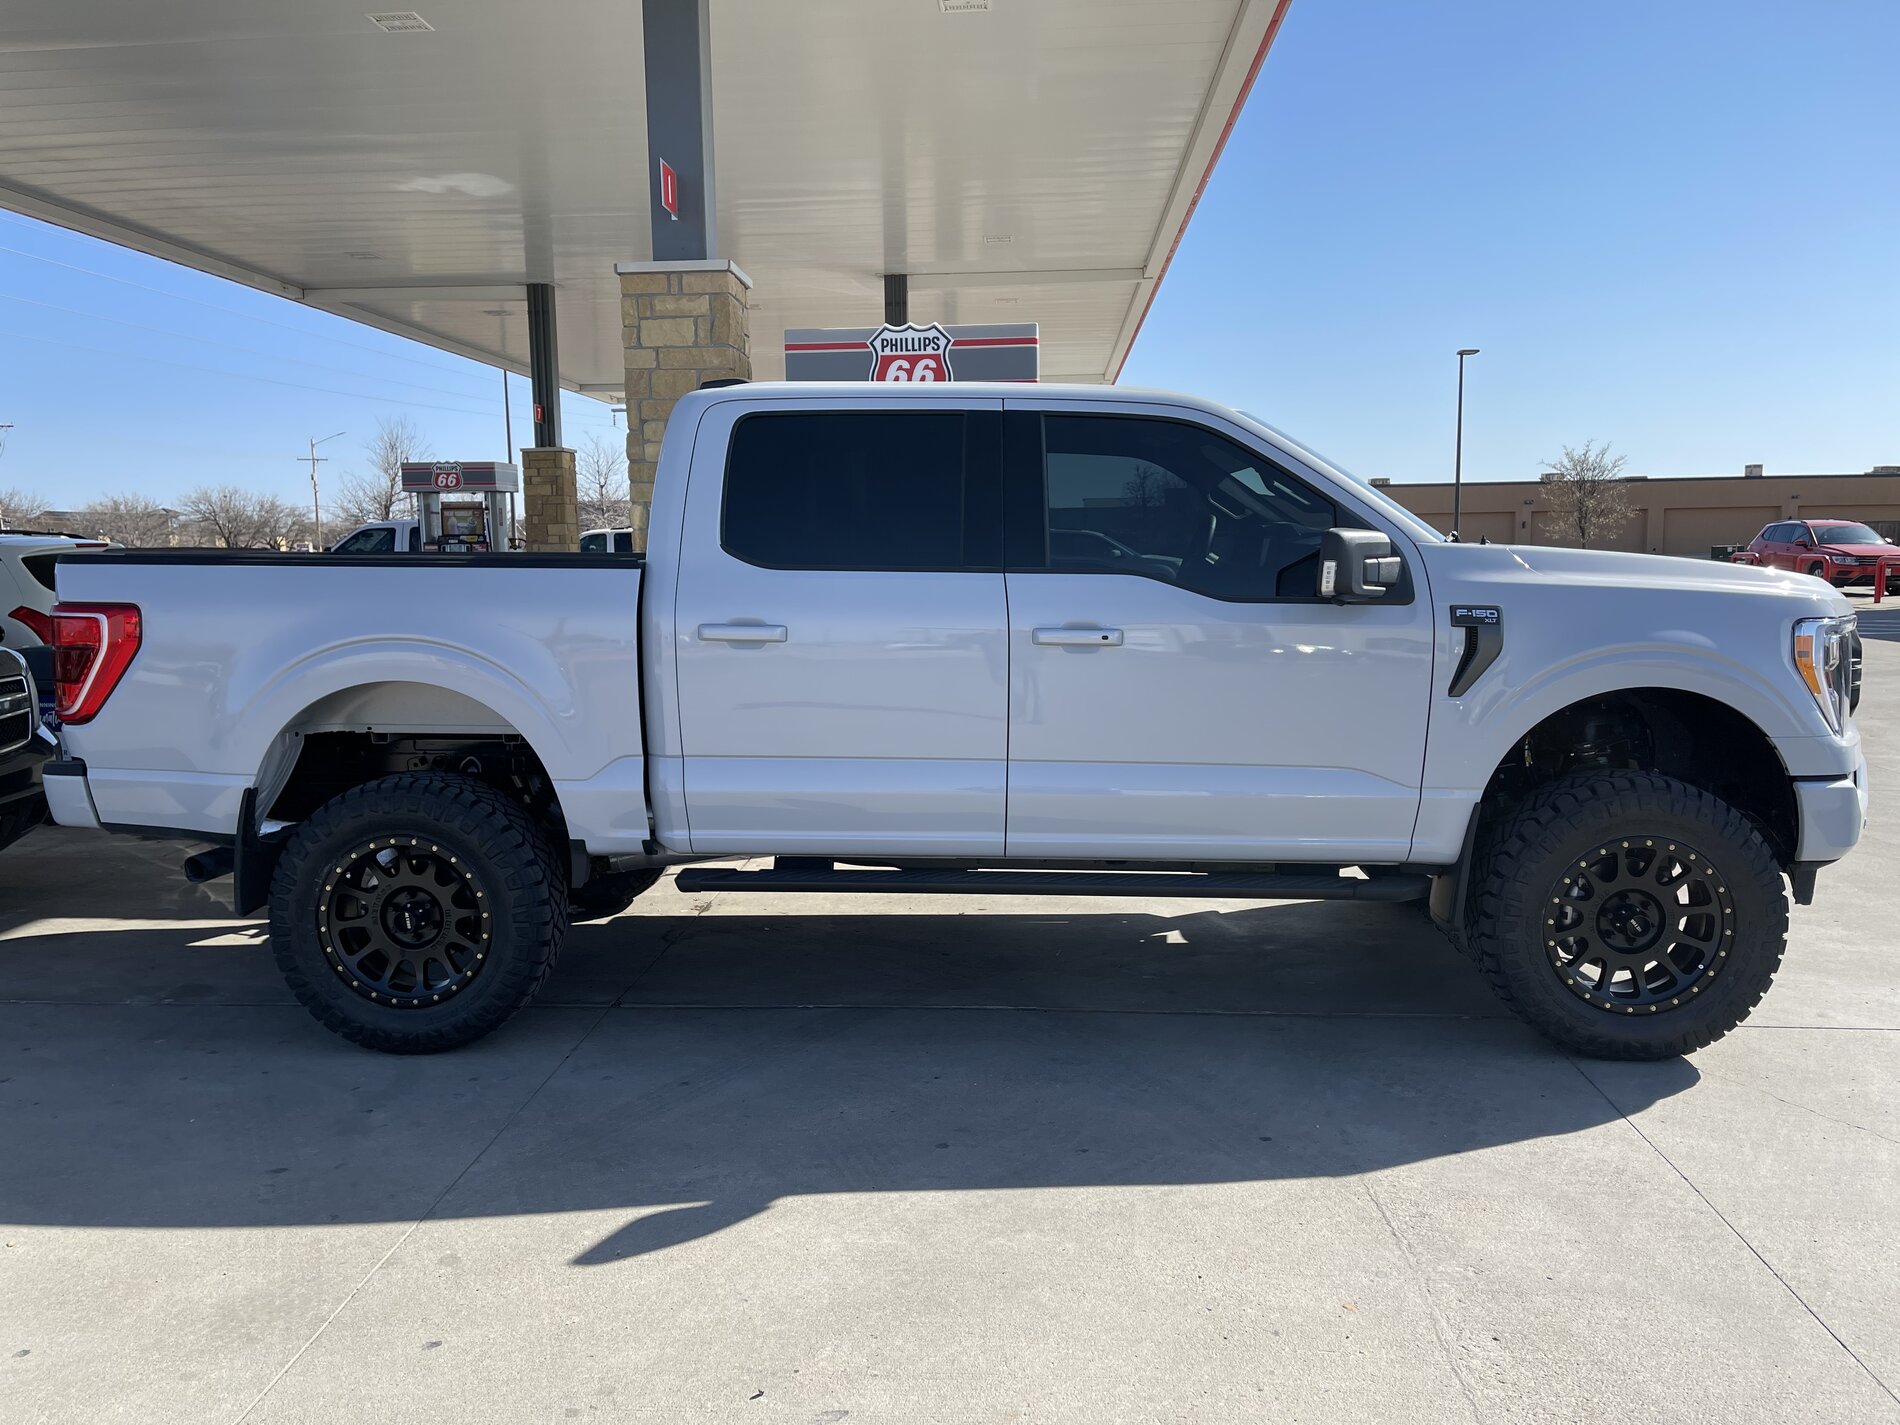 Ford F-150 BDS 2" 4" and 6" Lift Kits for 2021 F-150 released 77D9CB8D-023C-43C3-8C94-4B573D44F22E